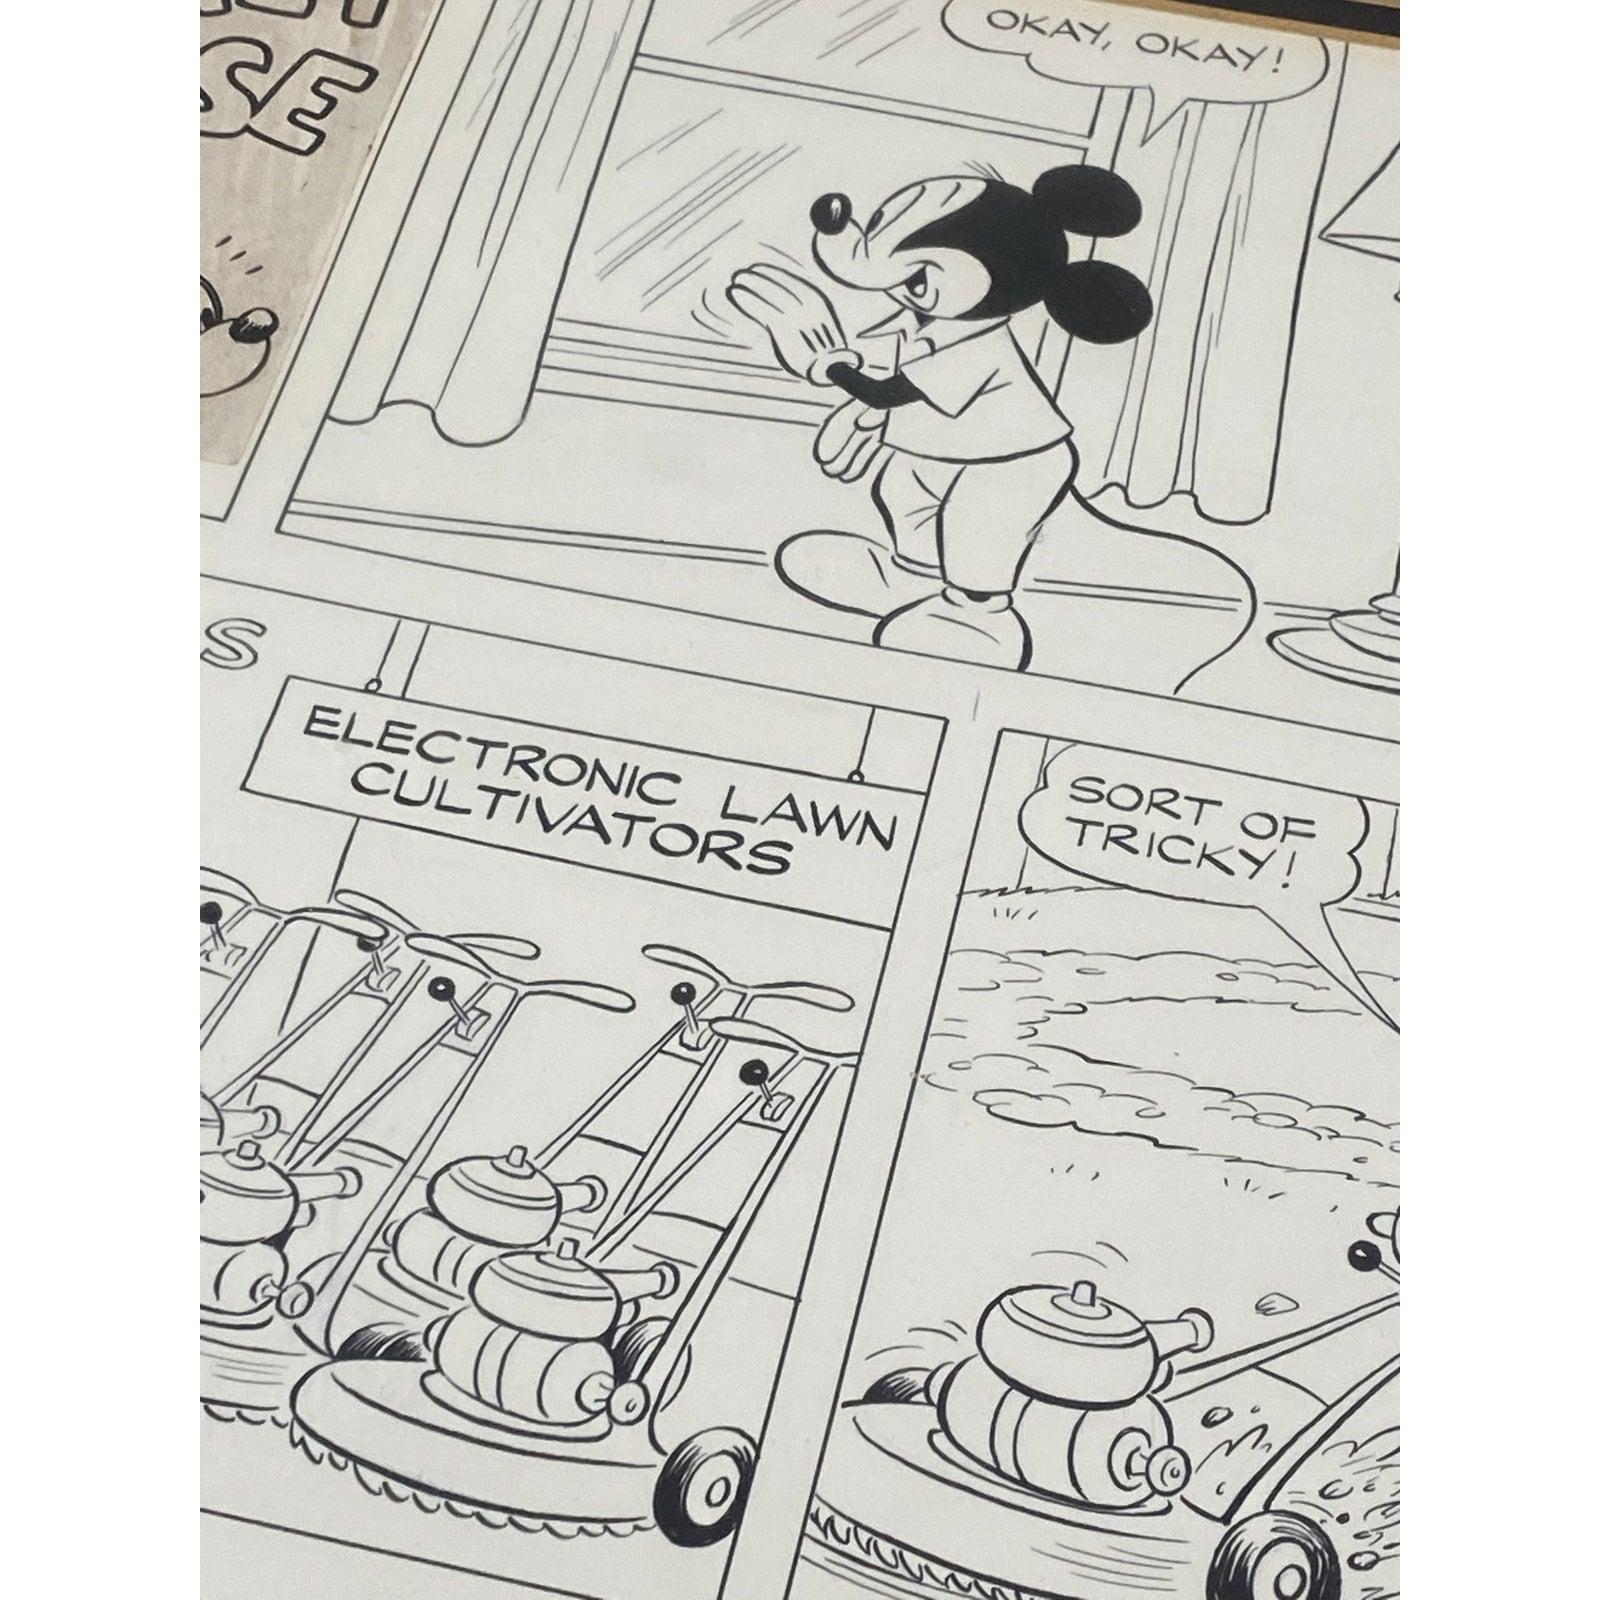 Mickey Mouse Original Comic Strip Art C.1967

Original pen and ink with mixed media

Dimensions 24.25